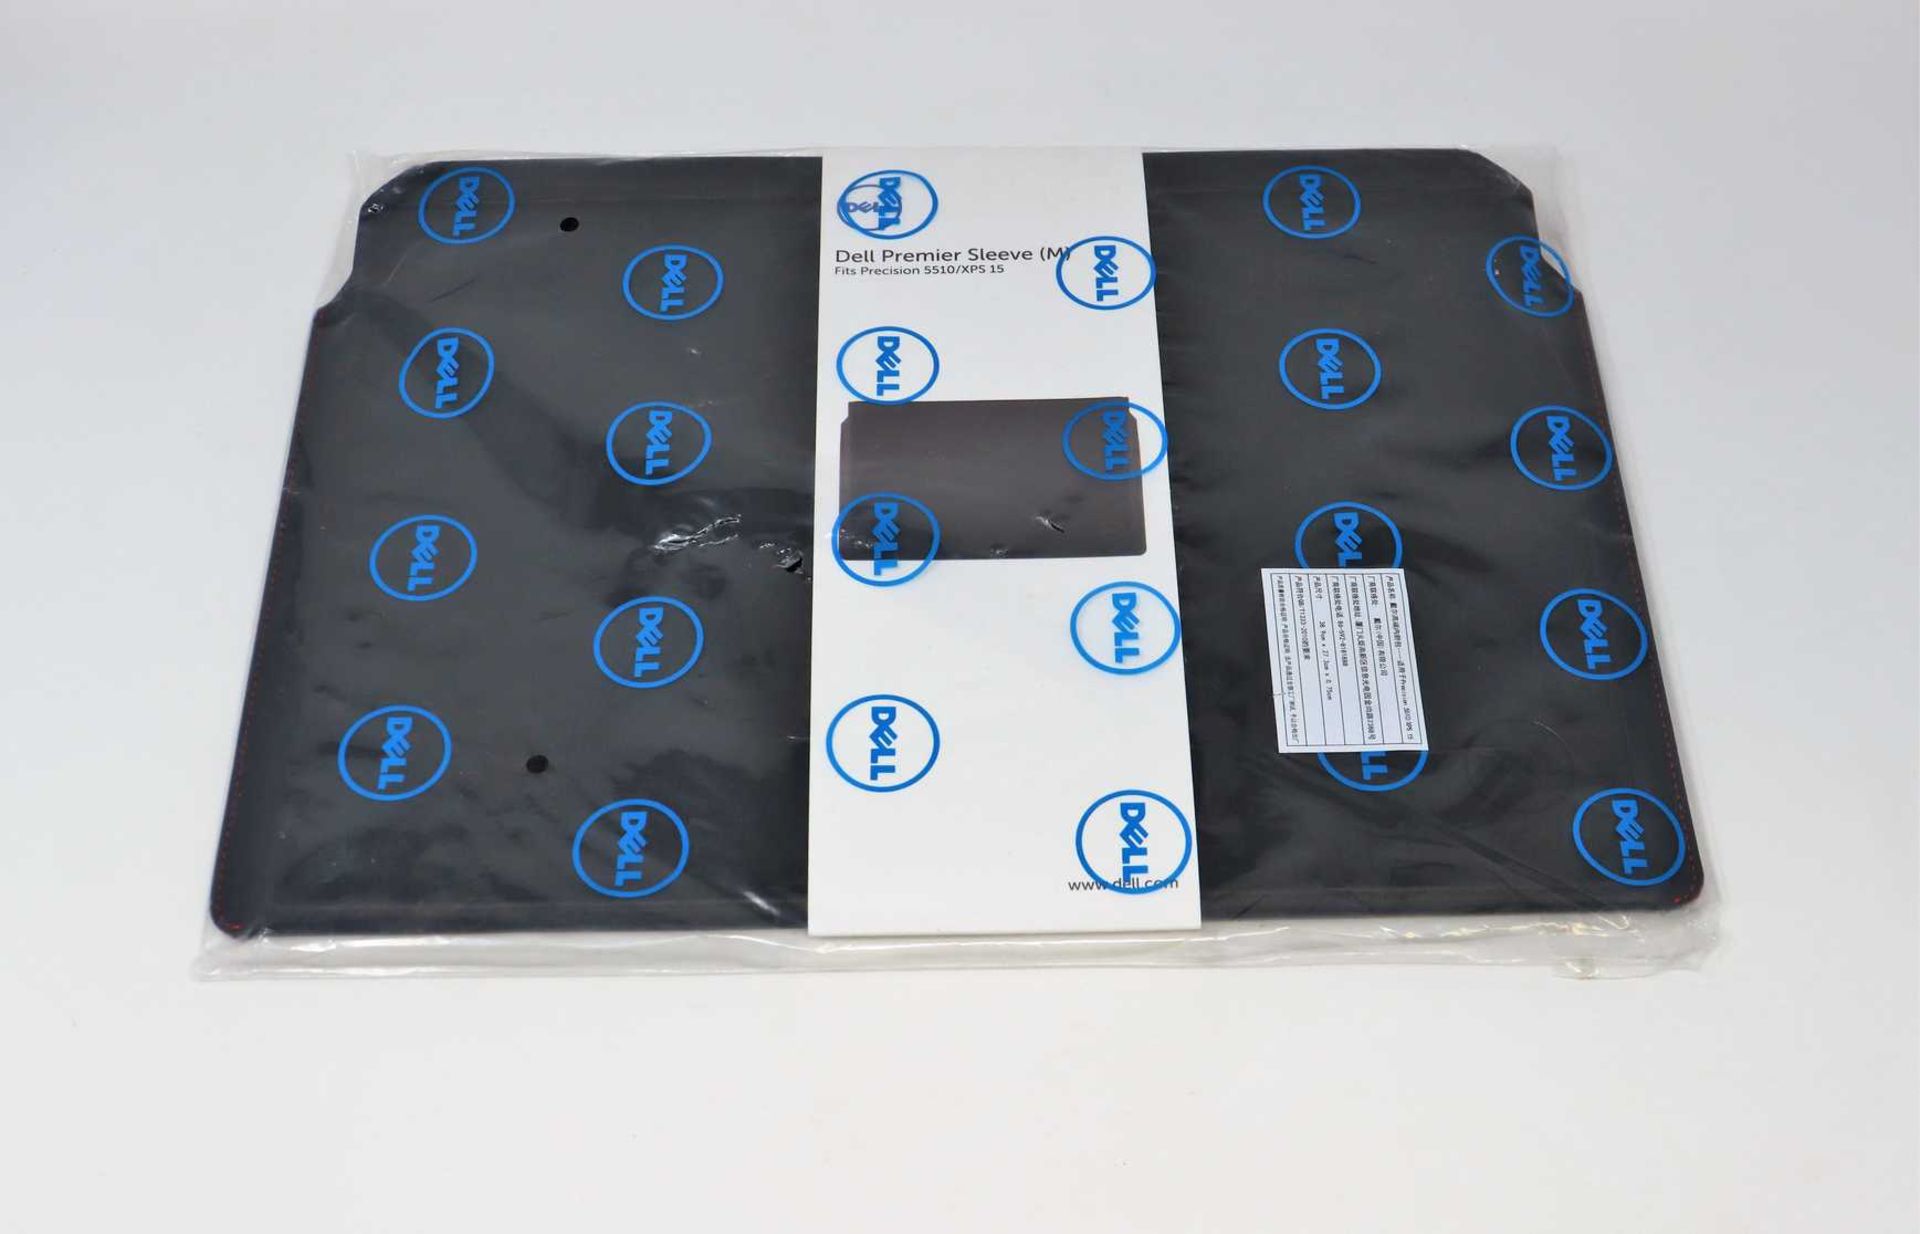 An as new 15" Dell Premier Sleeve for XPS 15 / Precision 5510 Ultrabook (Packaging sealed).